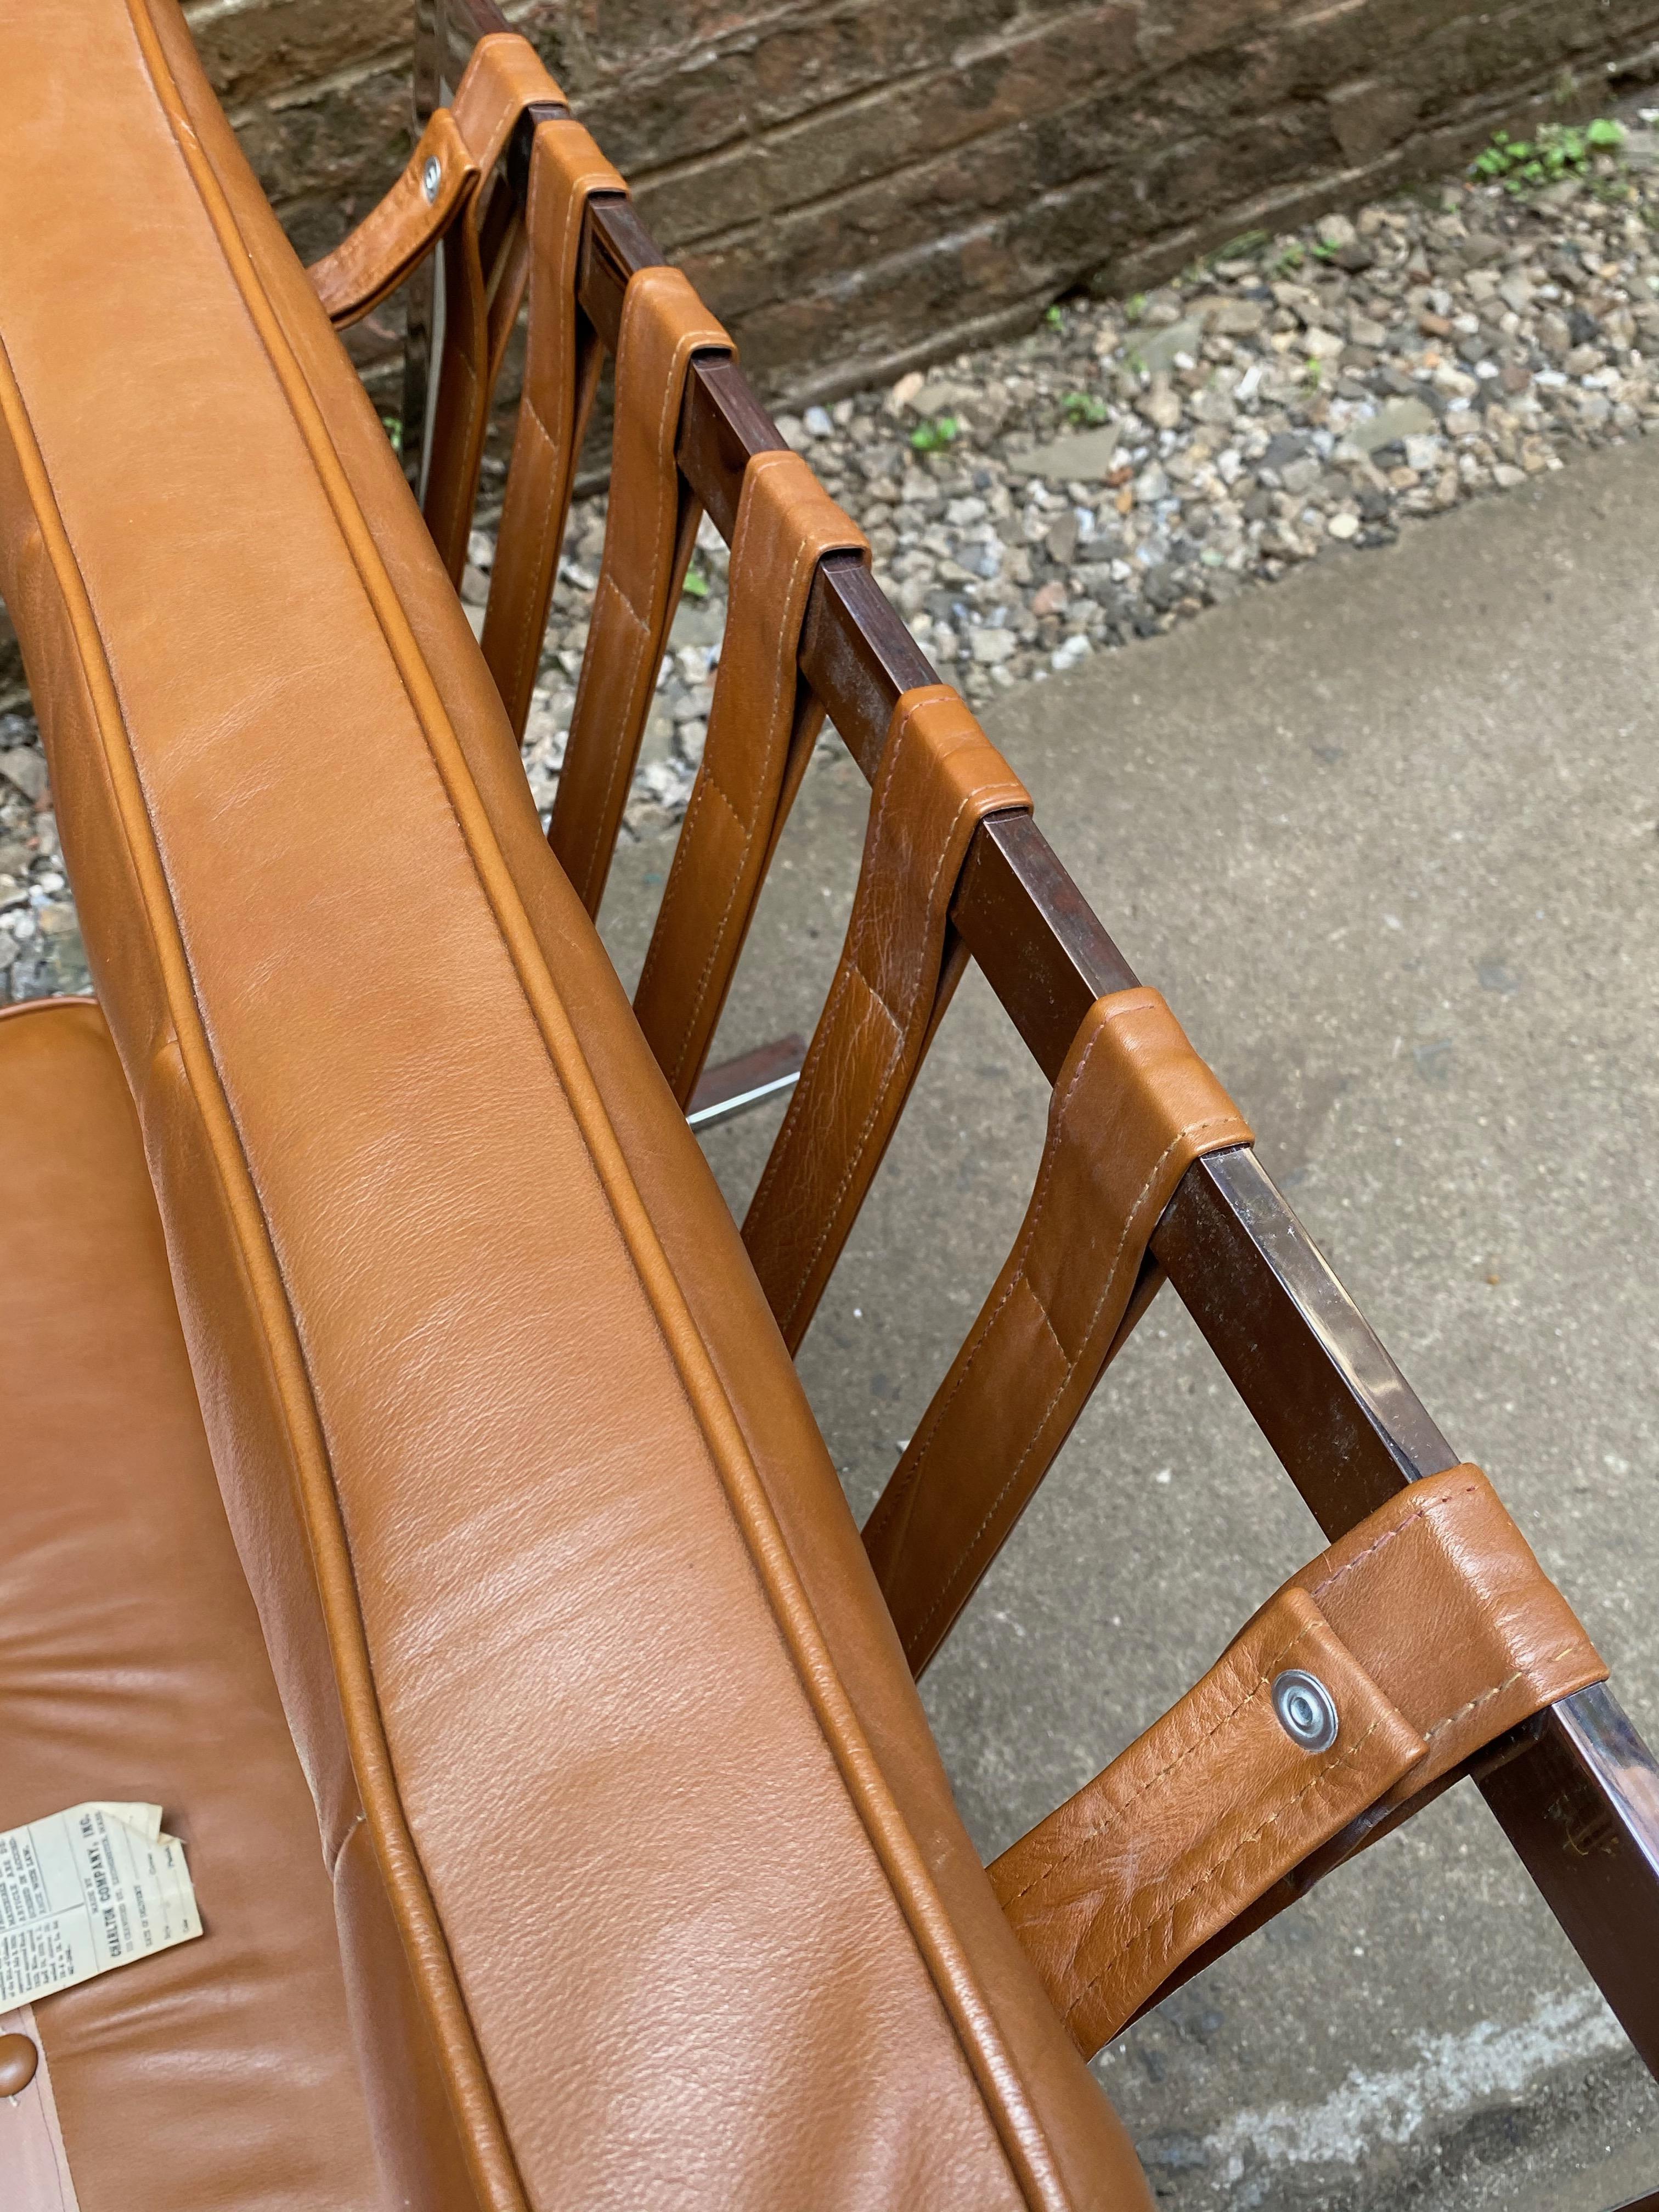 Barcelona Chairs for Charlton, Pair 2